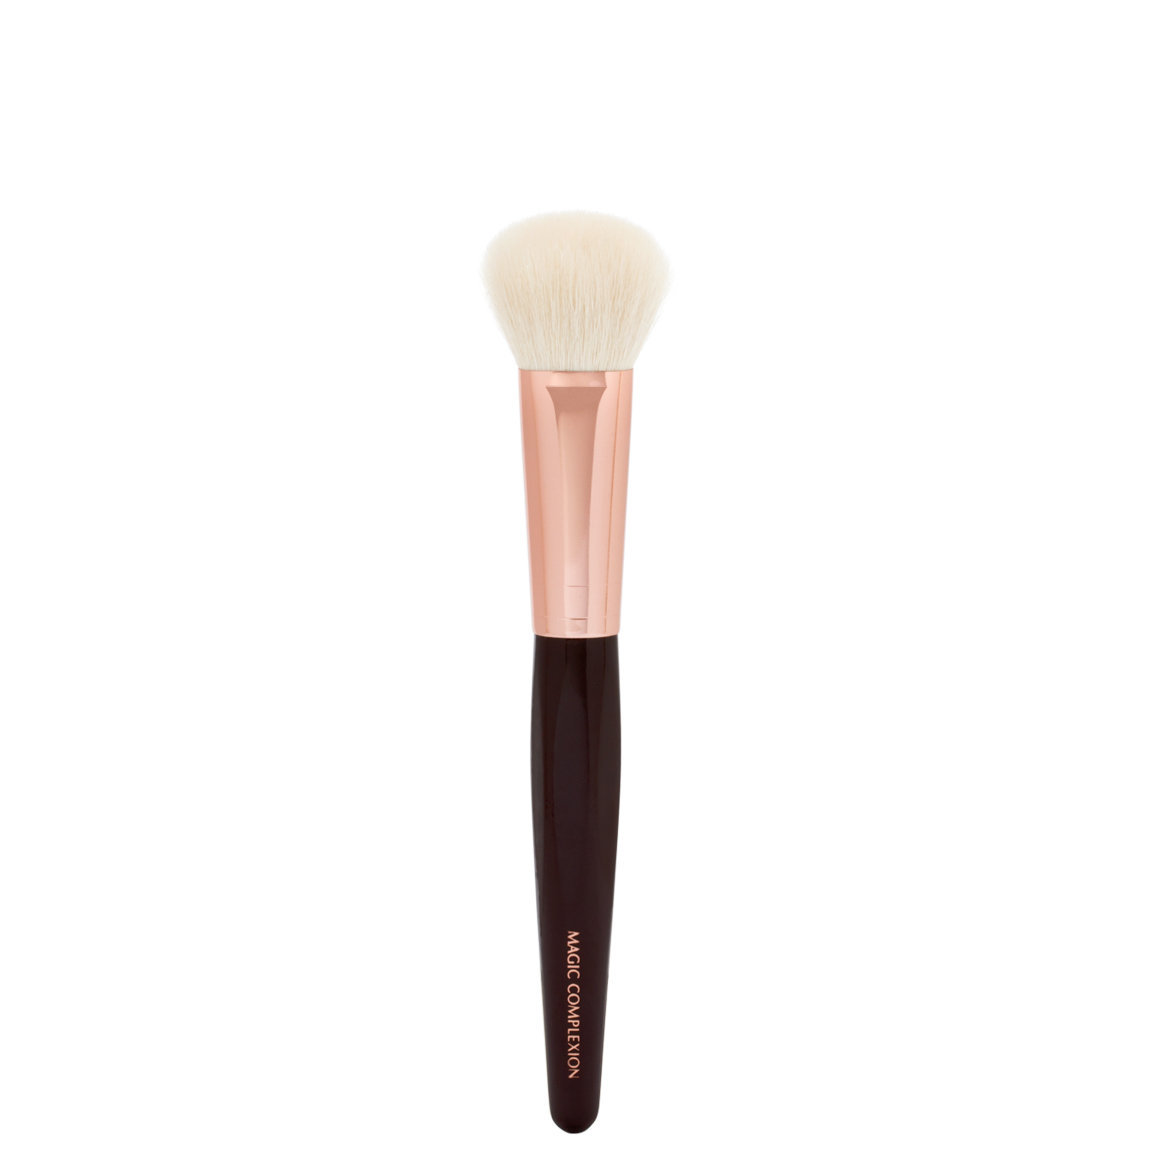 Charlotte Tilbury Magic Complexion Brush alternative view 1 - product swatch.